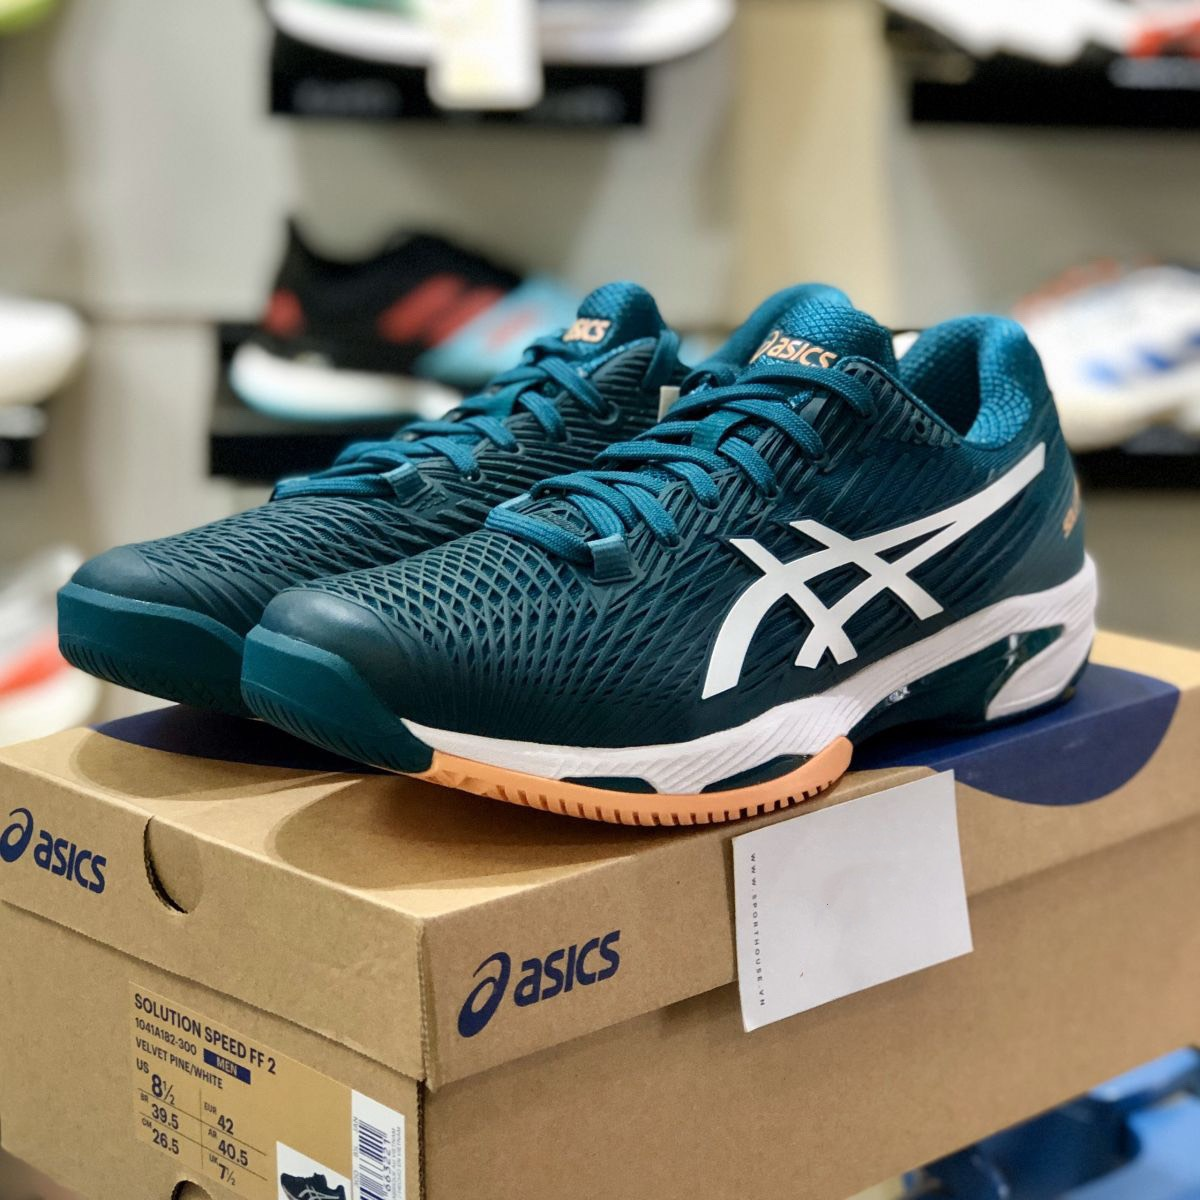 https://admin.thegioigiay.com/upload/product/2023/01/giay-tennis-asics-solution-speed-ff-2-2022-mau-xanh-63d78d488a053-30012023162632.png